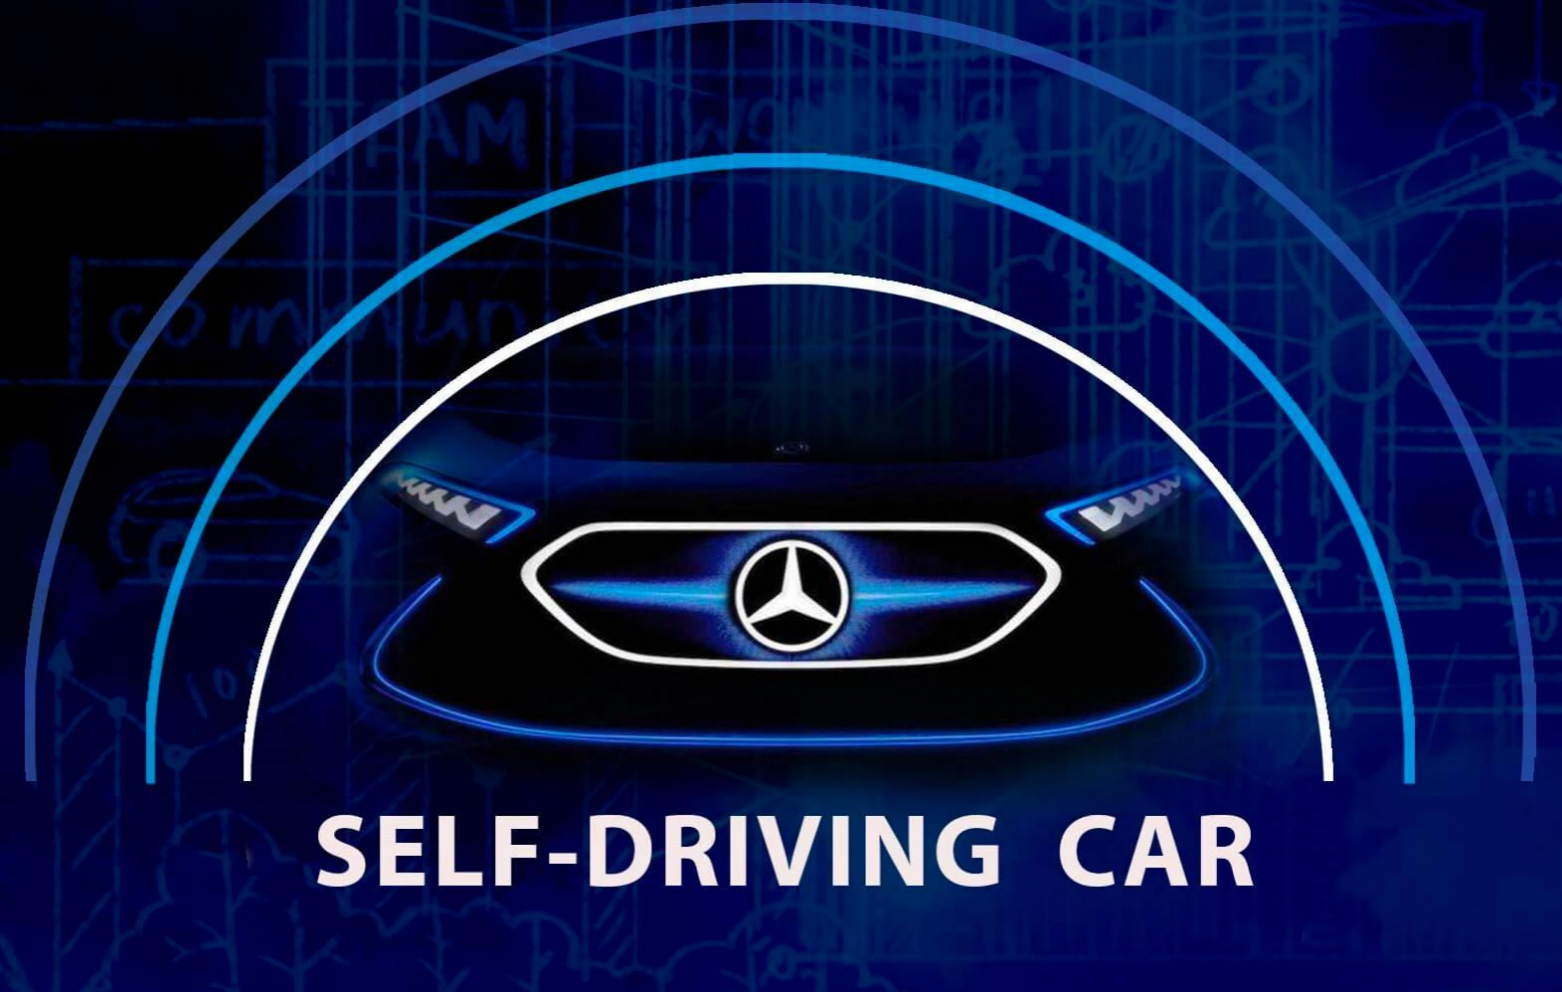 Level 3 Autonomous Driving Getting Closer Us to The Ultimate Mercedes Self-Driving Car?